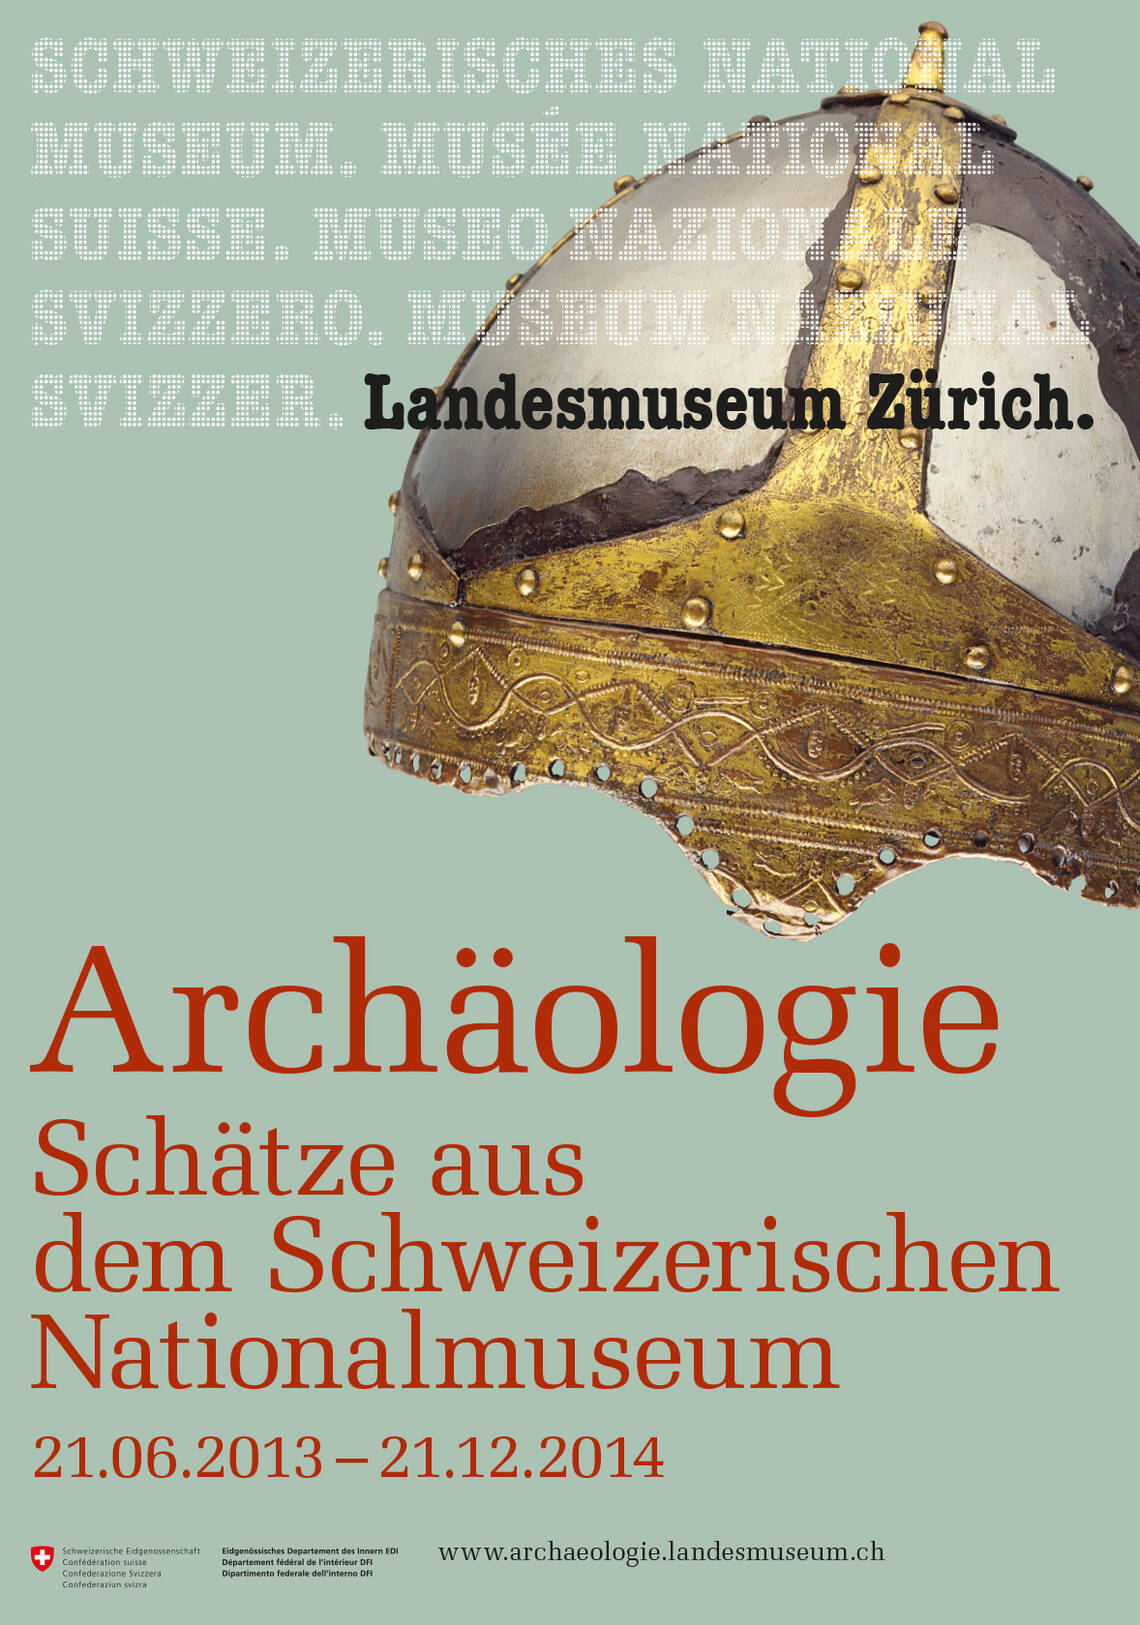 Poster of the "ARCHAEOLOGY" exhibition